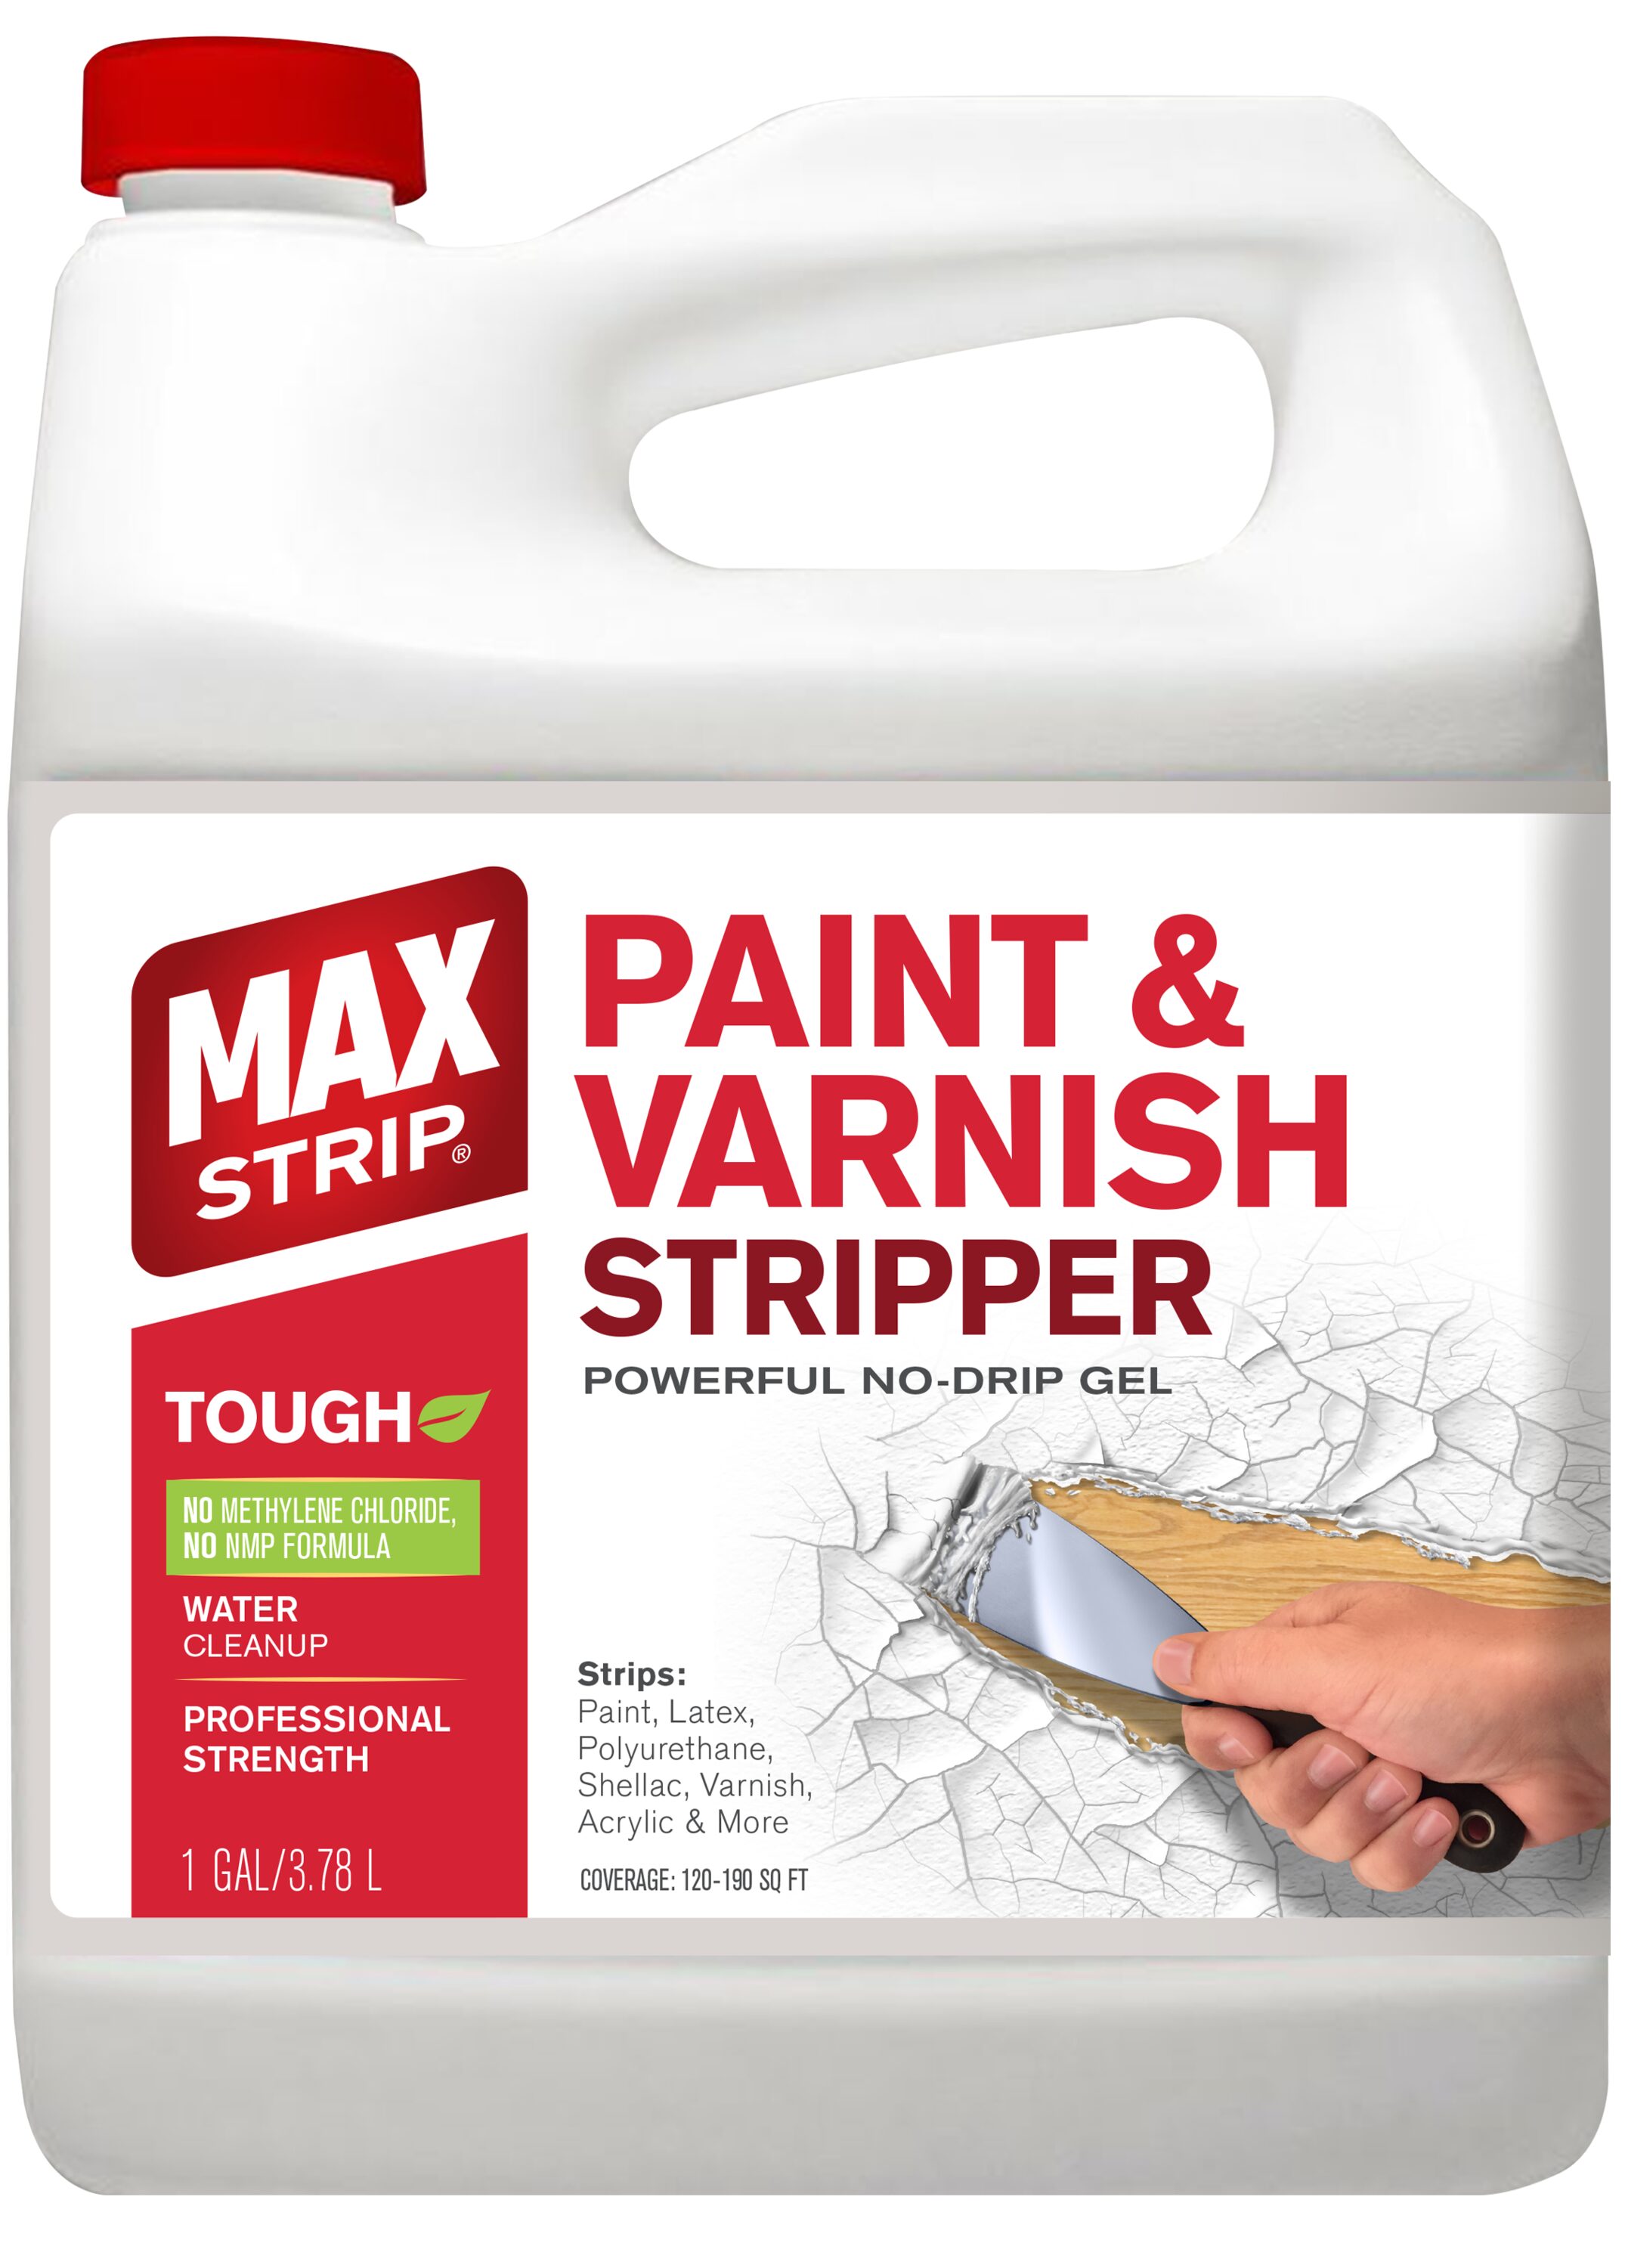 StripPaint 9900 - Remove Paint and Cured Coatings from Metal Surfaces -  Ecoatings, Wet and Powder Coating Remover - Works on Aluminum, Steel,  Brass